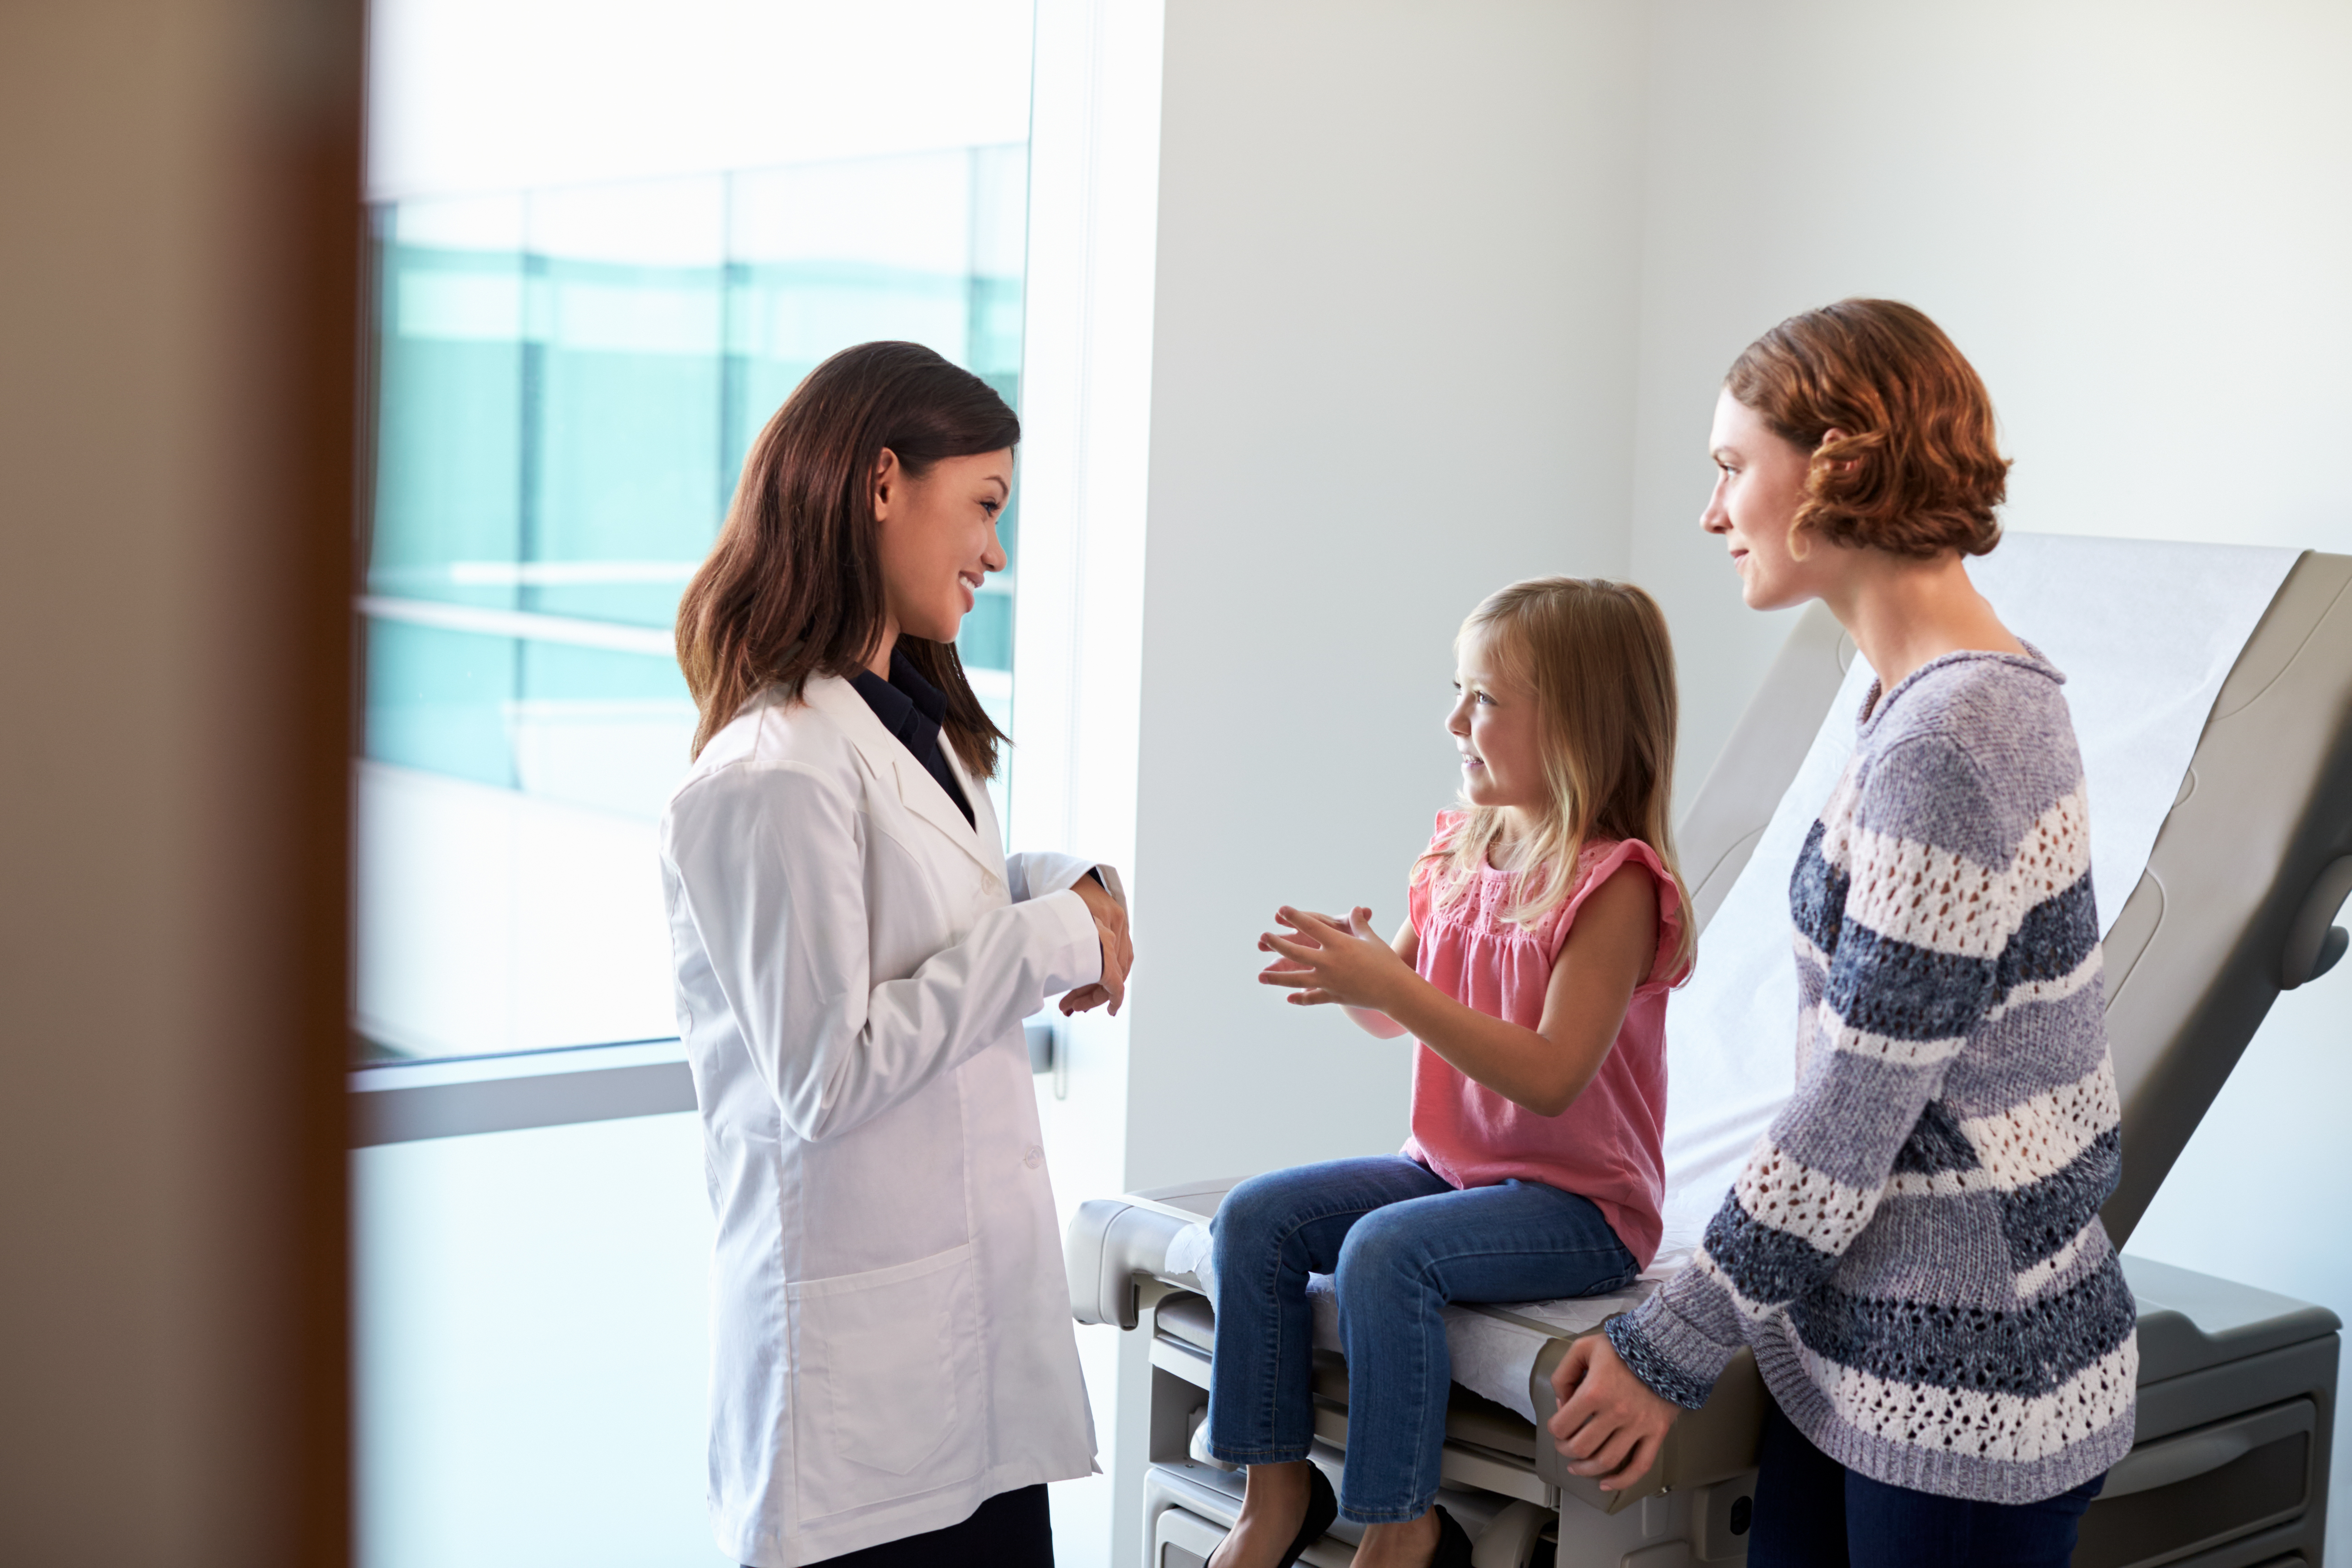 Pediatricians Play Important Role in Decreasing Sugary Drink Intake in Young Children